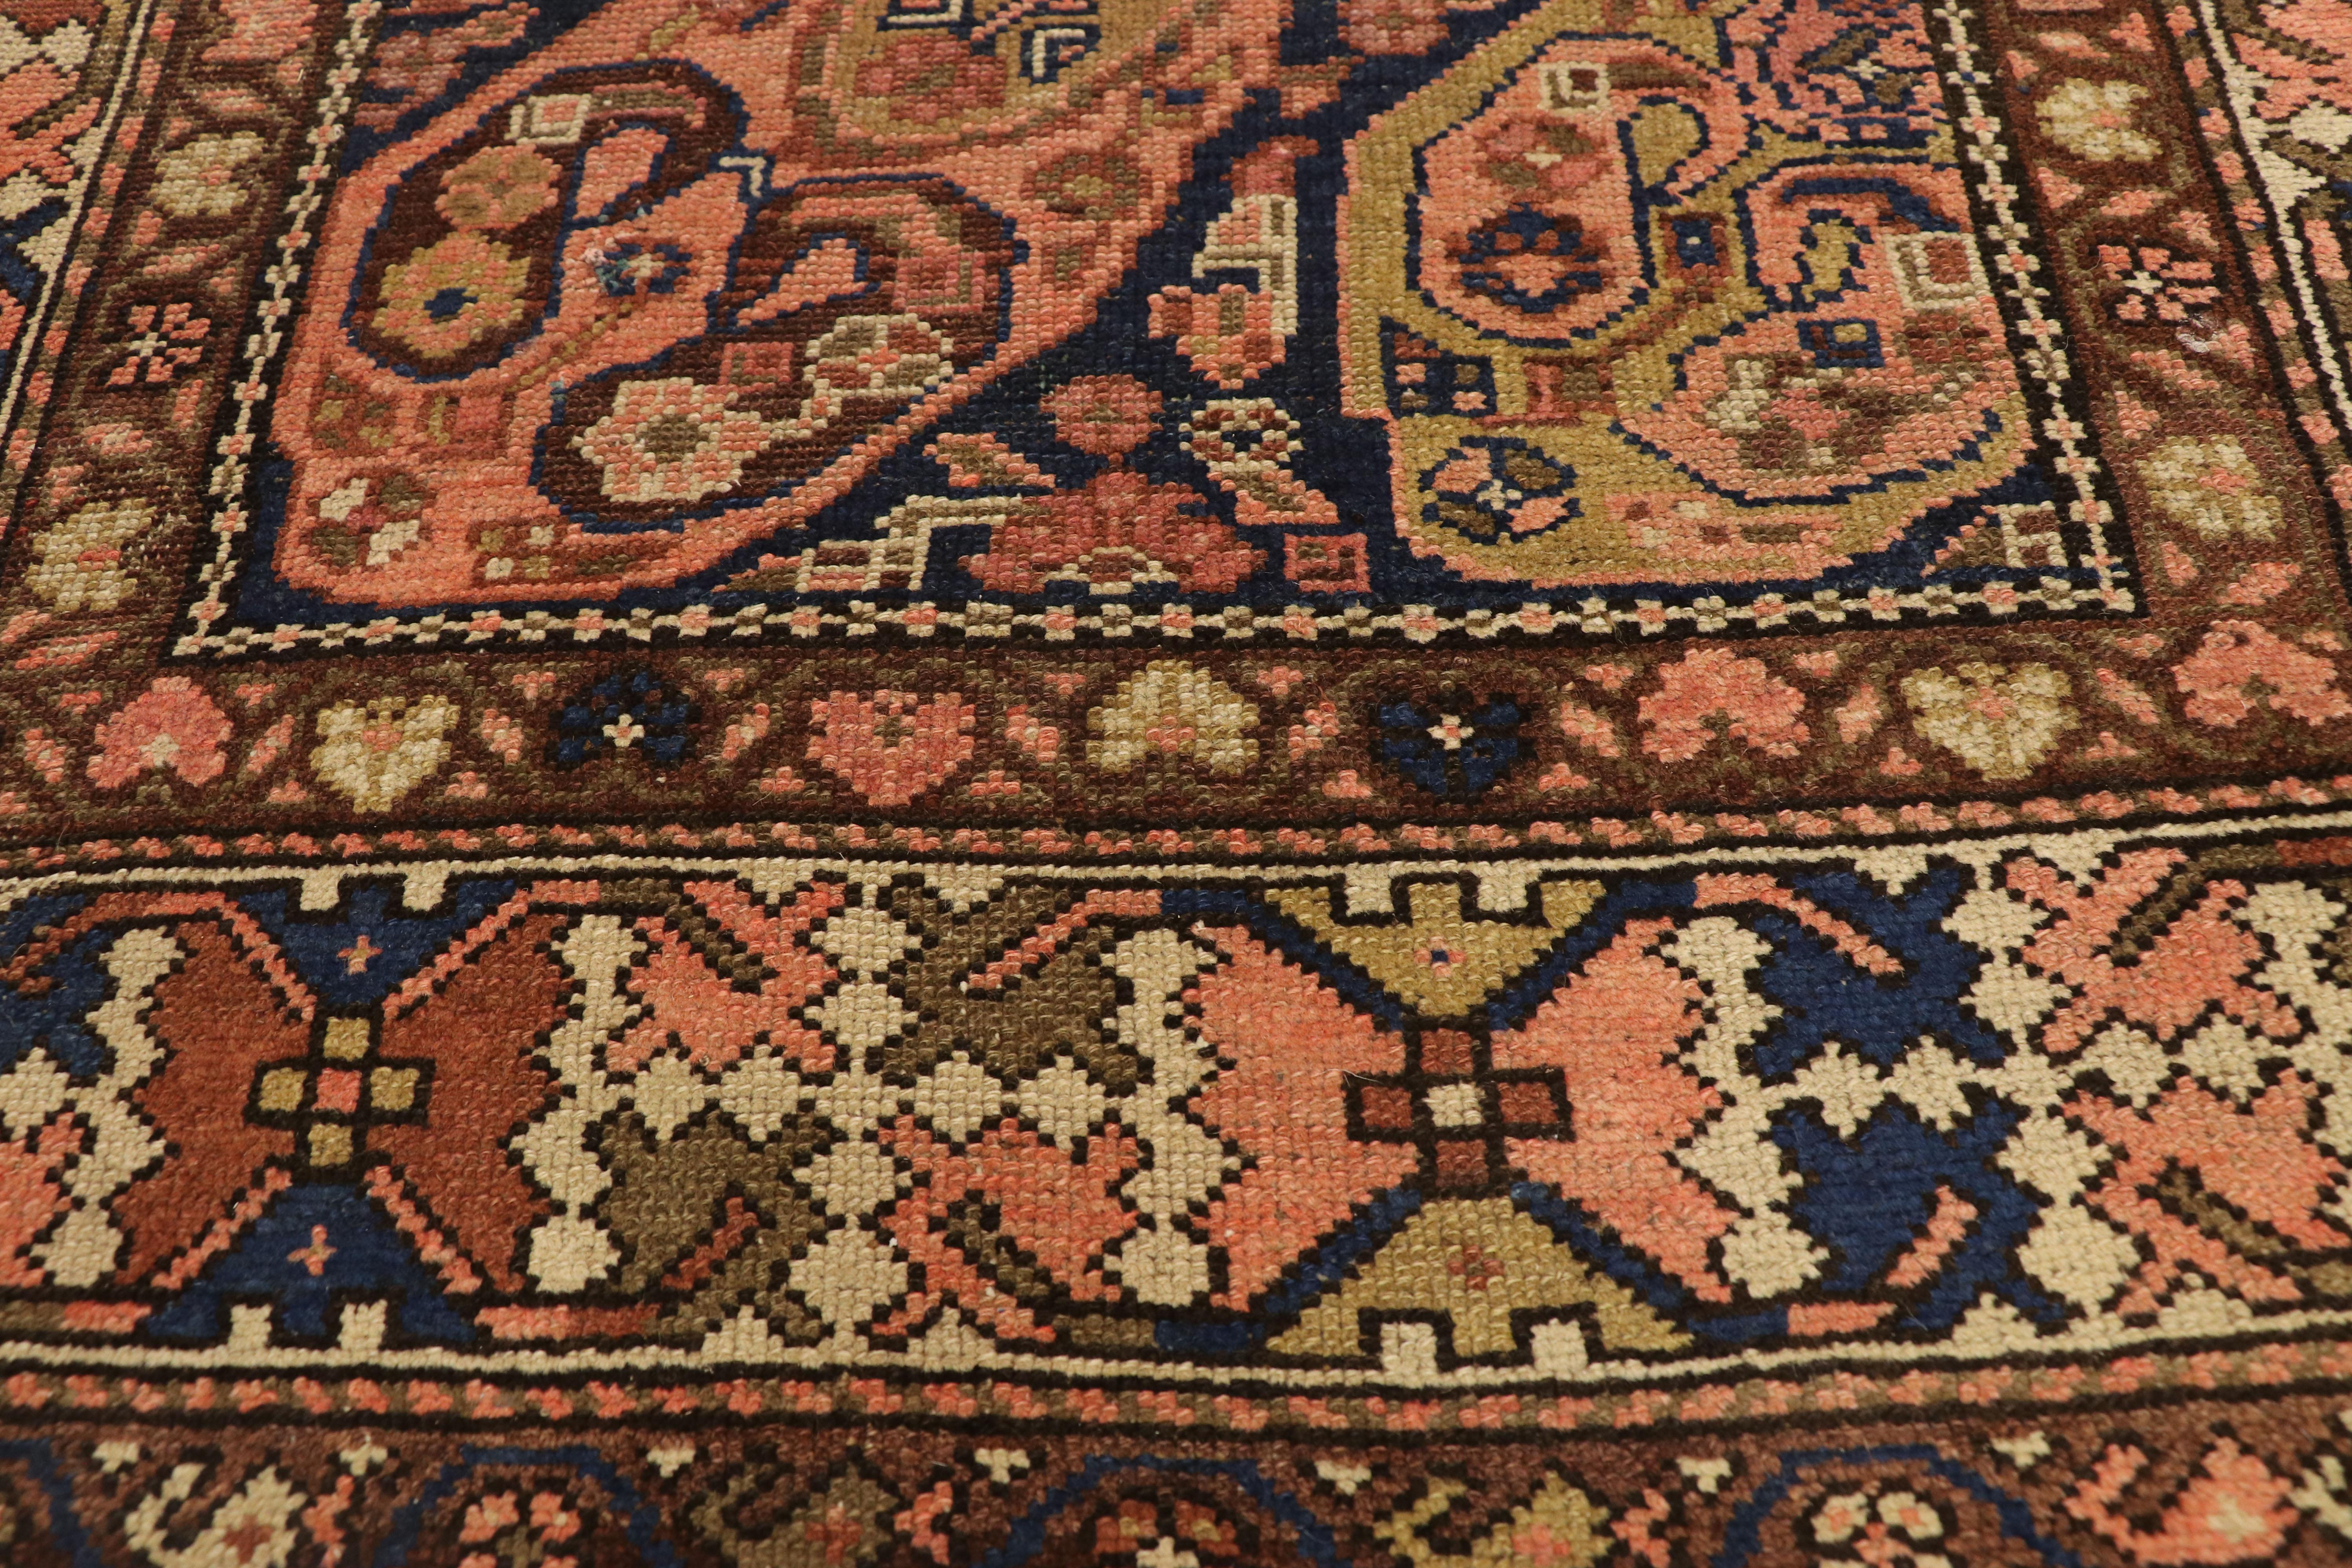 Antique Persian Malayer Runner with Boteh Design, Extra-Long Hallway Runner In Good Condition For Sale In Dallas, TX